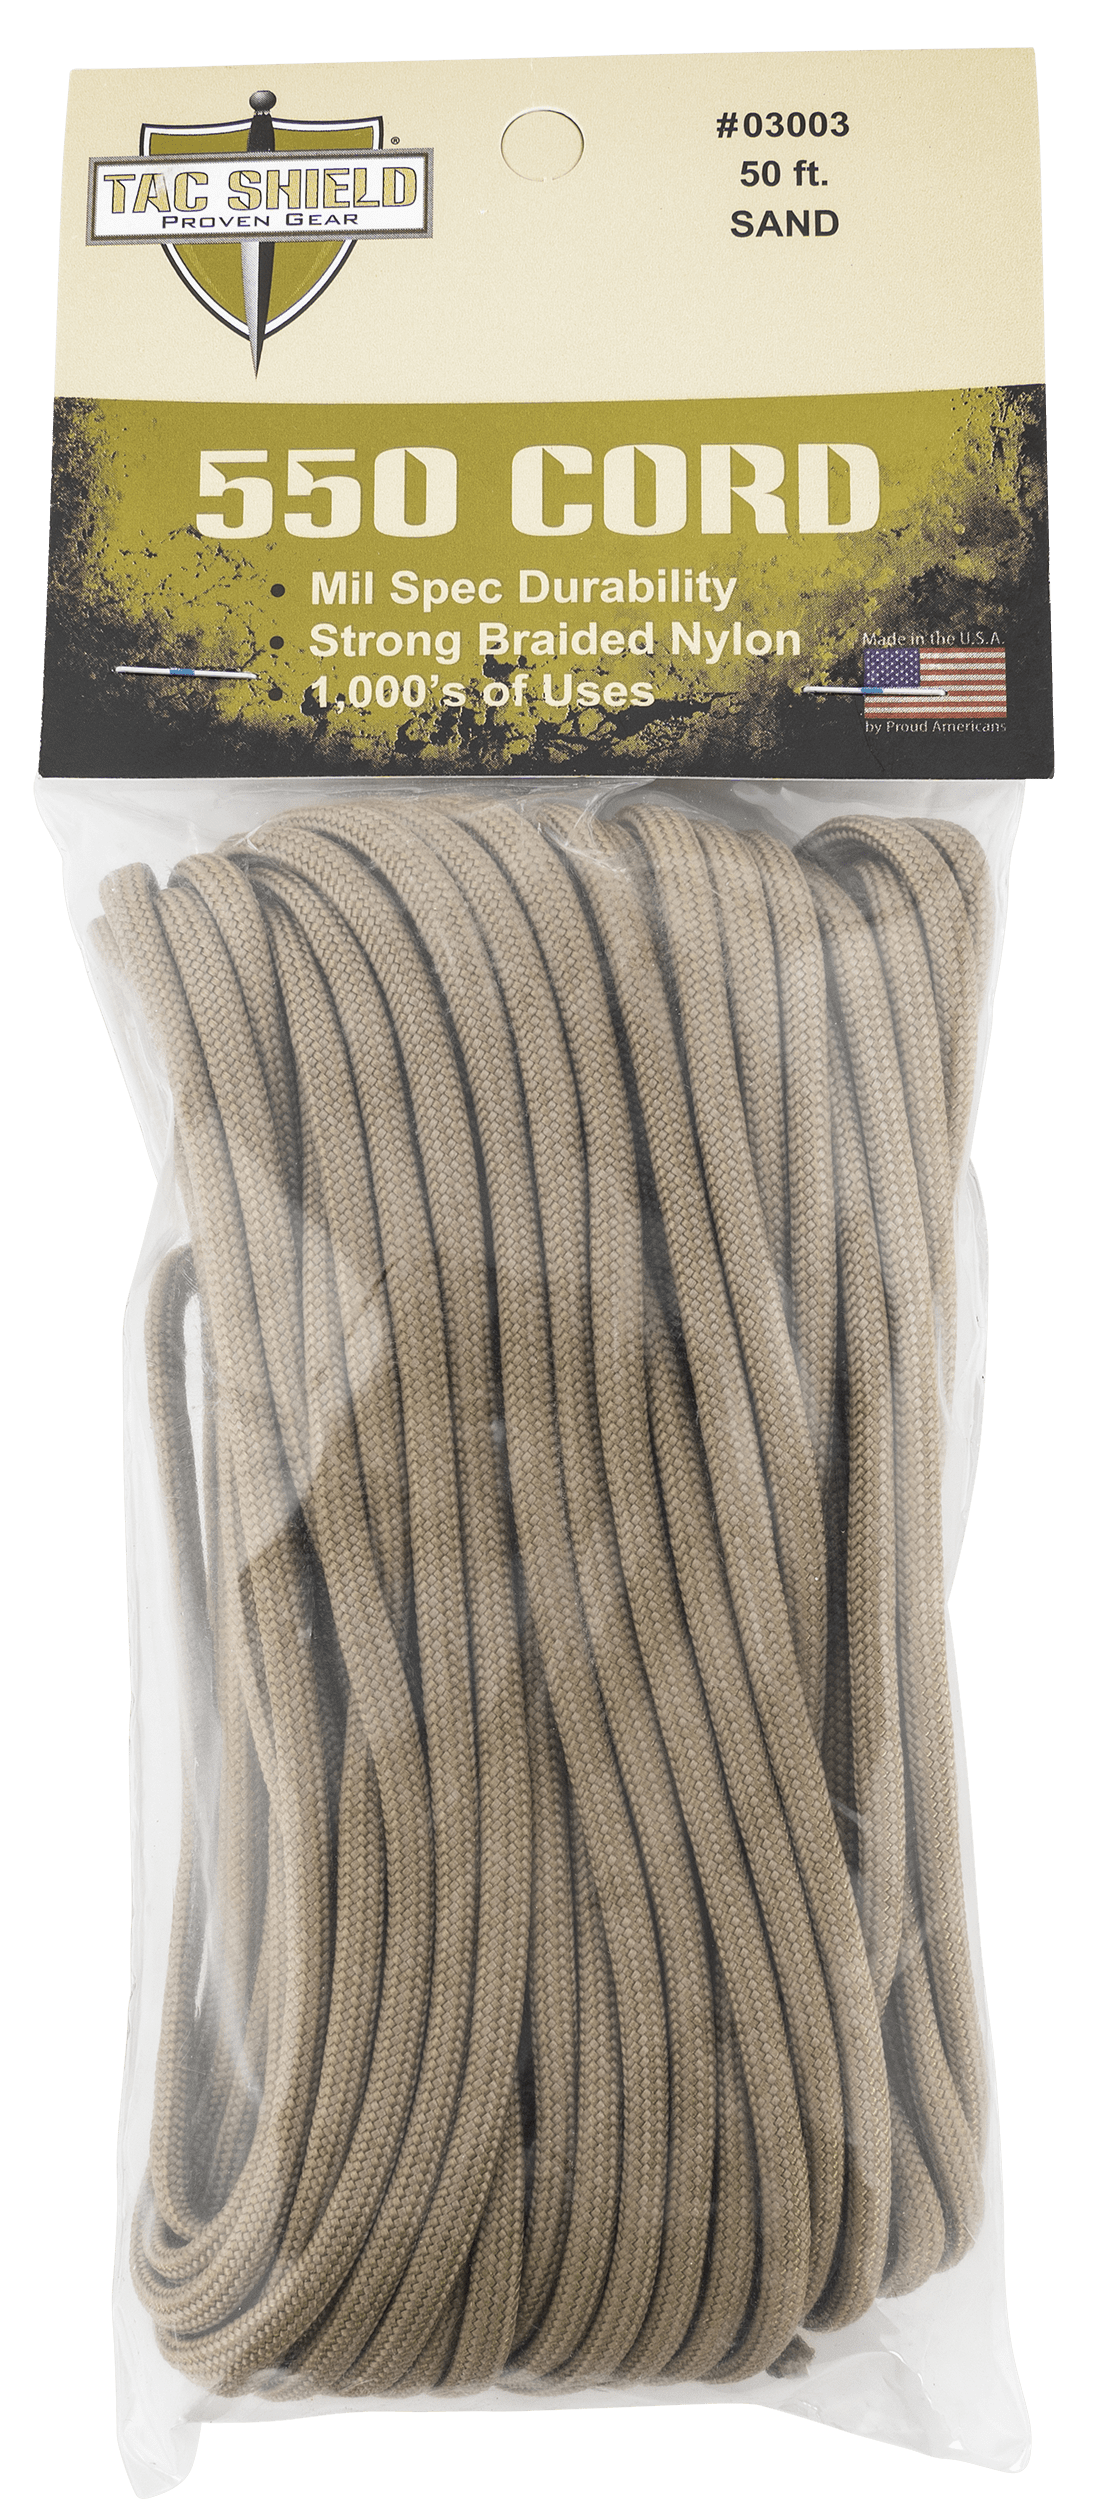 TACSHIELD (MILITARY PROD) Tacshield (military Prod) 550 Cord, Tacshield 03003   550 Para Cord 50 Ft  Sand Accessories